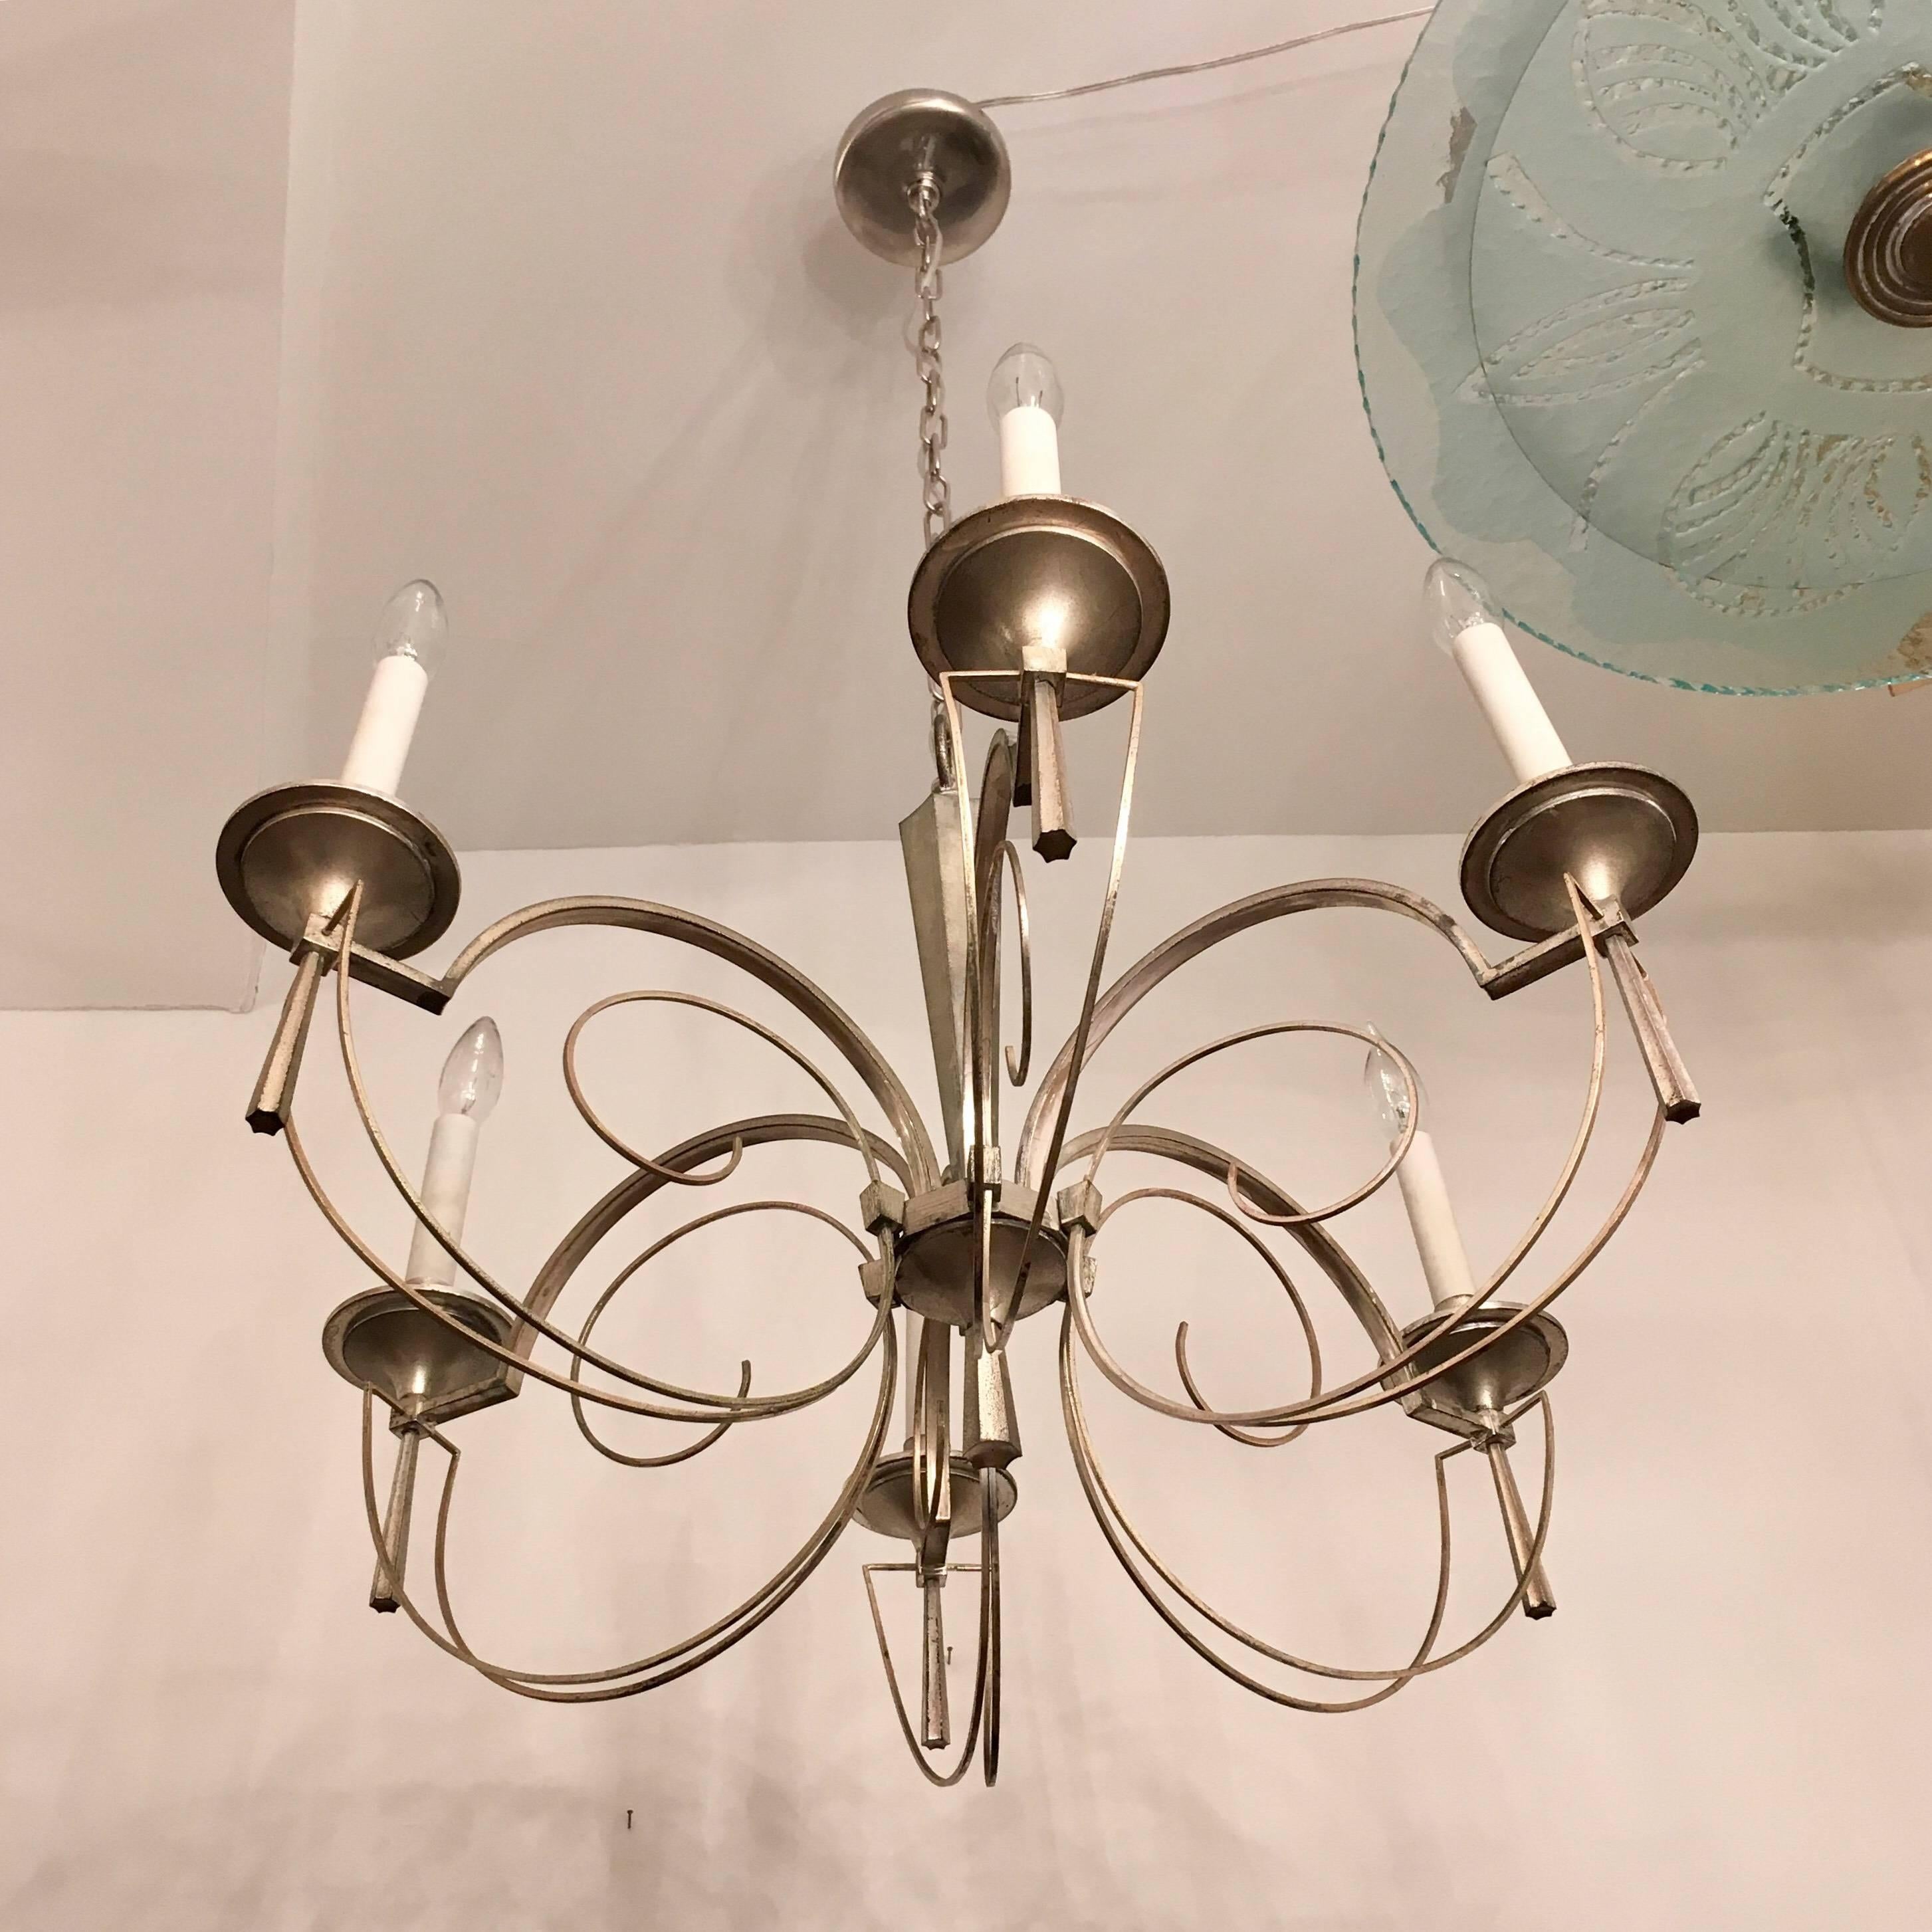 An original 1960s silvered Italian Regency style six-arm chandelier by the famed lighting company, Sciolari. Newly rewired.